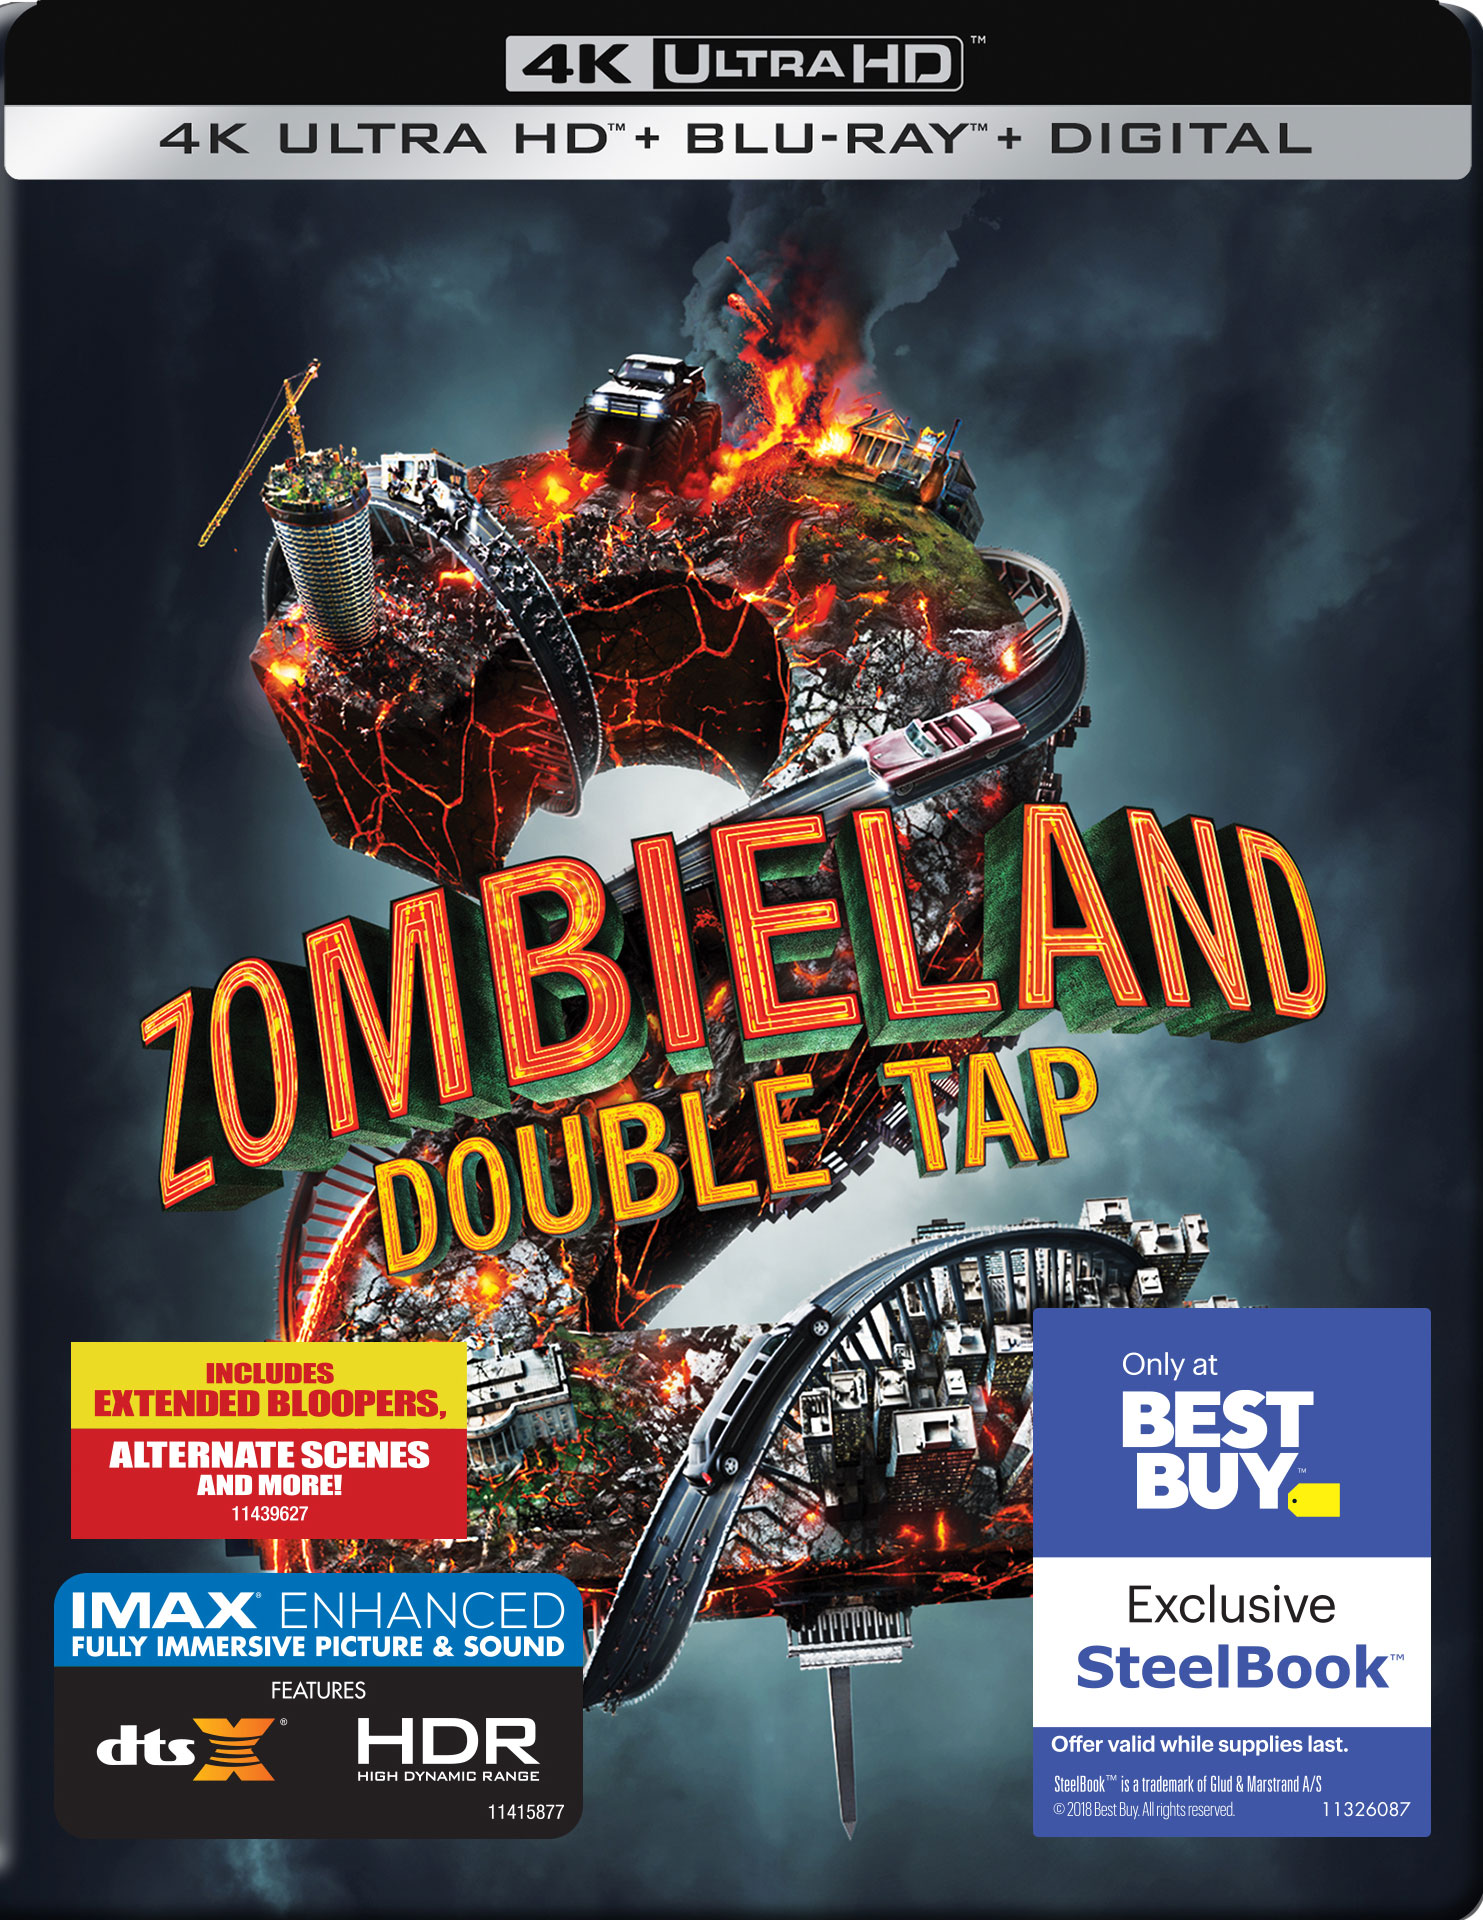 Zombieland: 2-Movie Collection [New DVD] 2 Pack, Ac-3/Dolby